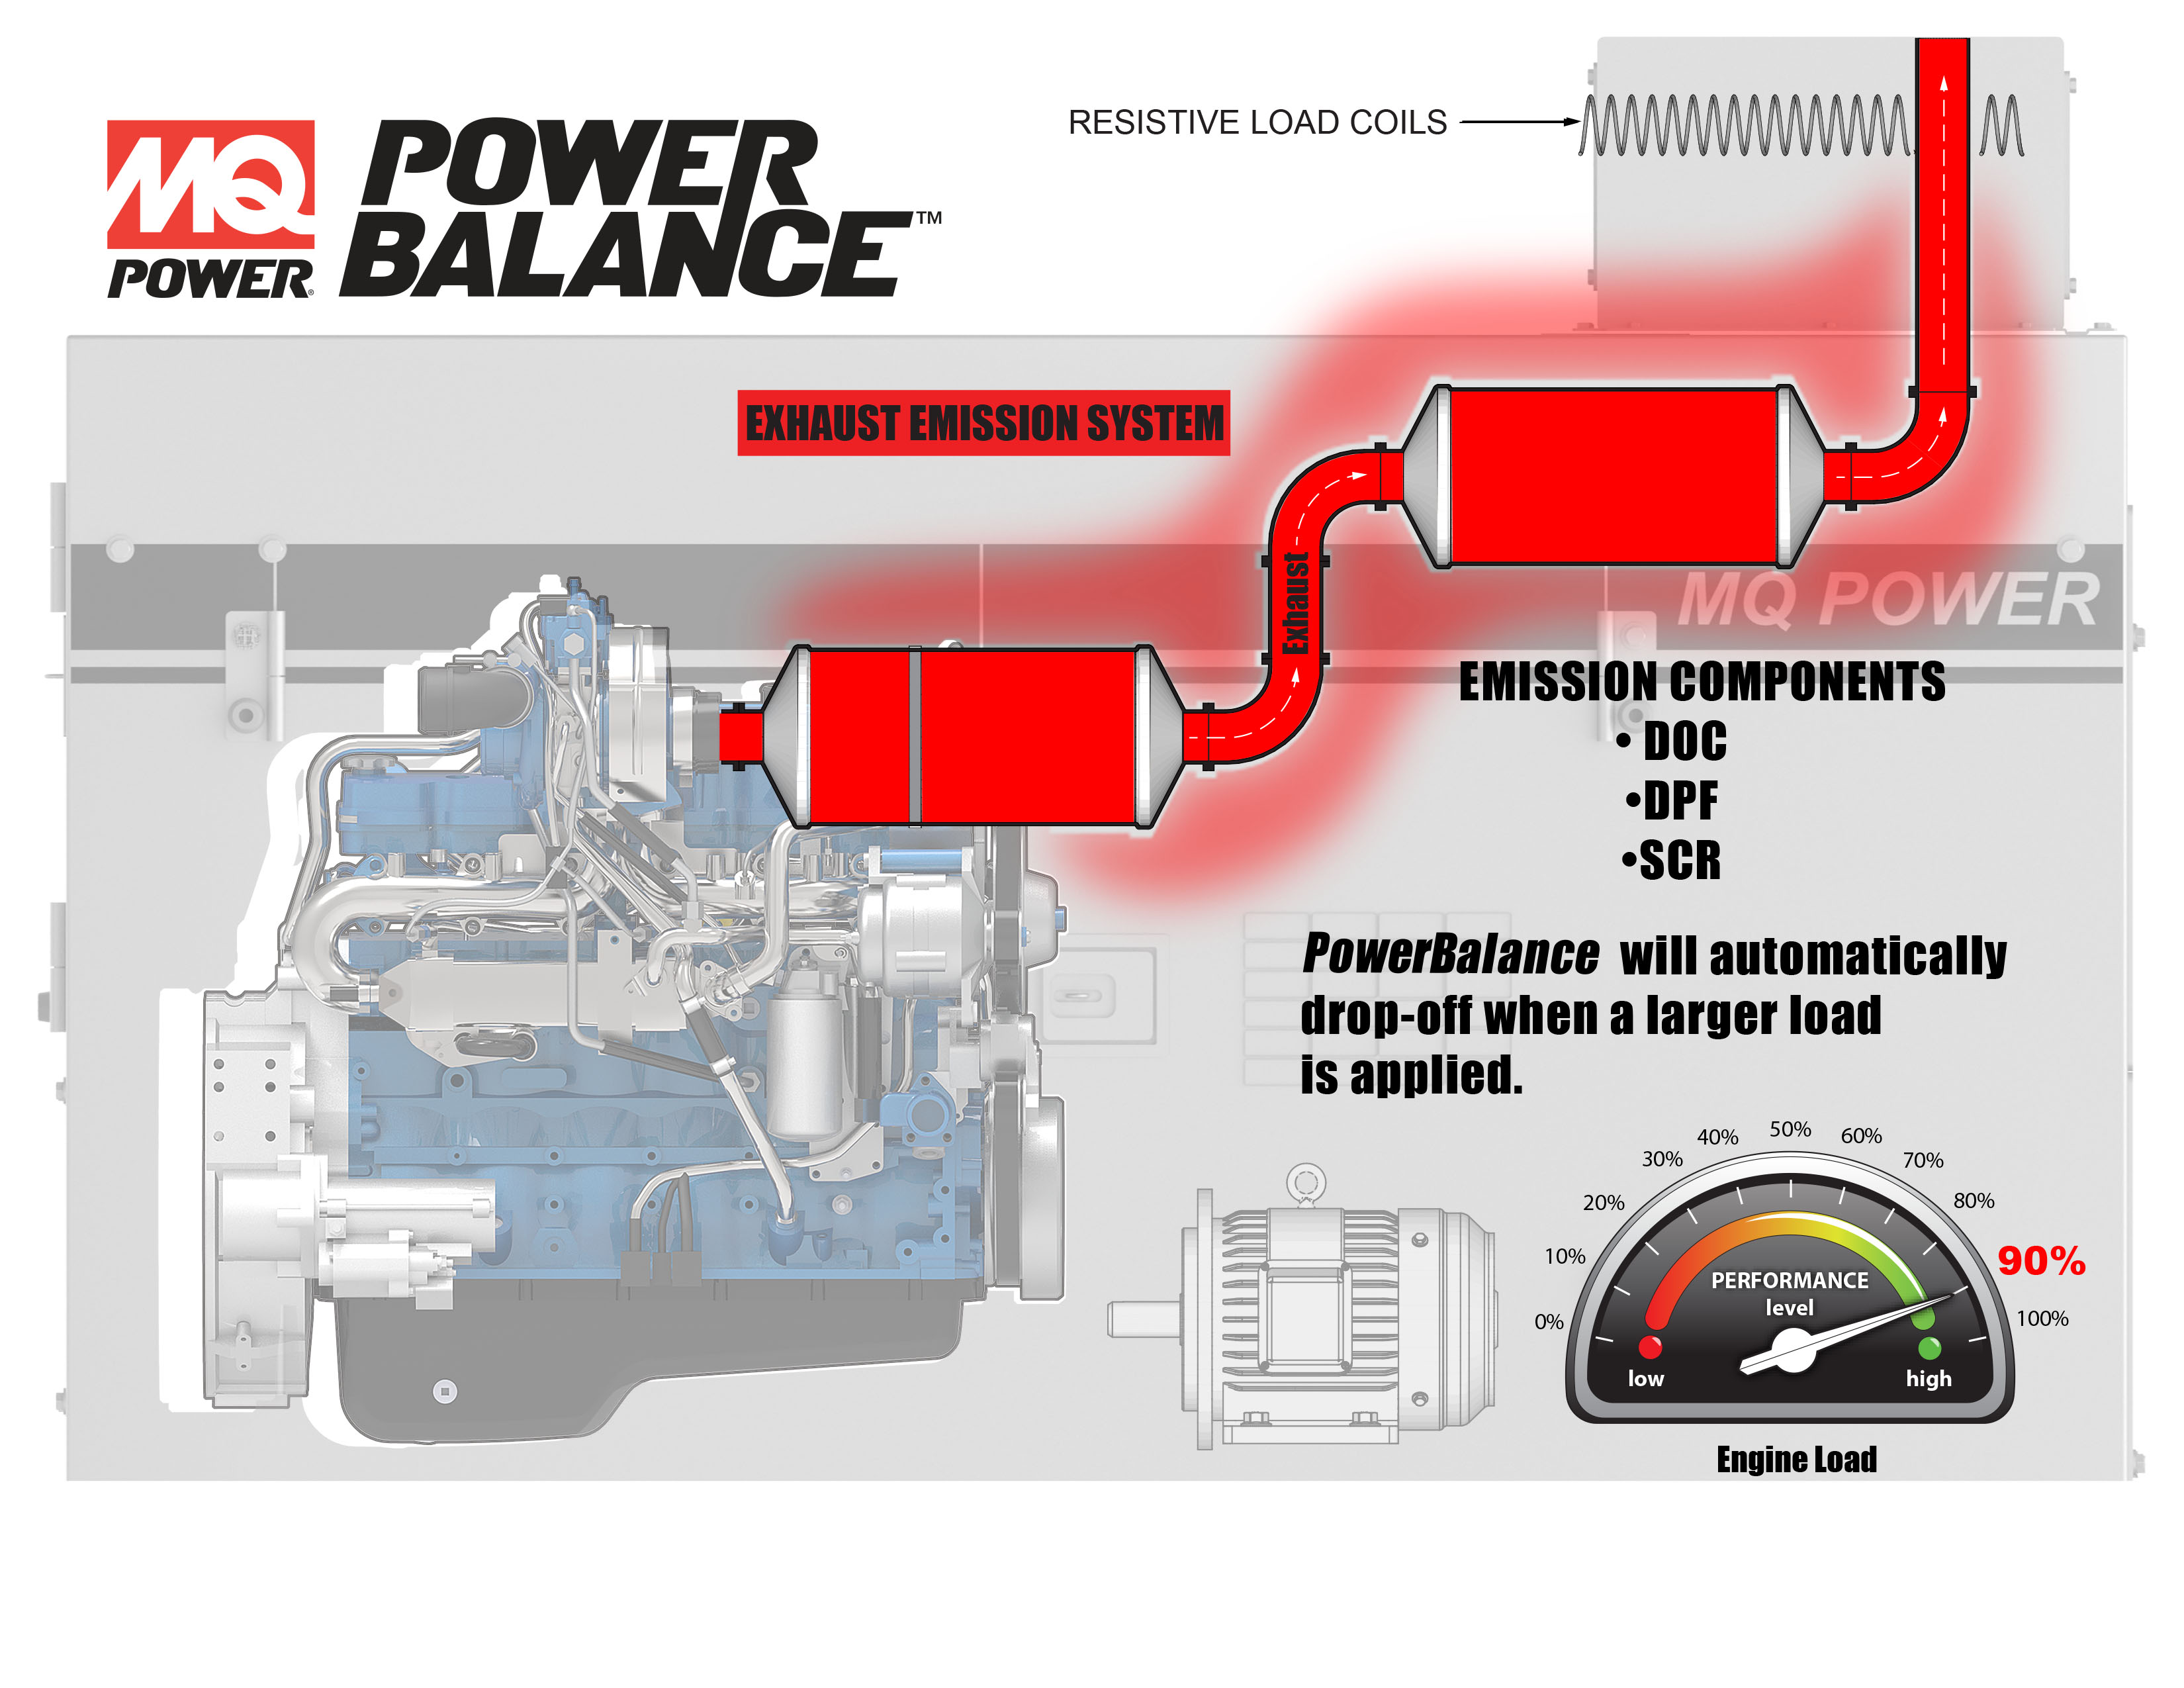 PowerBalance™ automatically disengages the resistive coil load bank when a larger load is applied